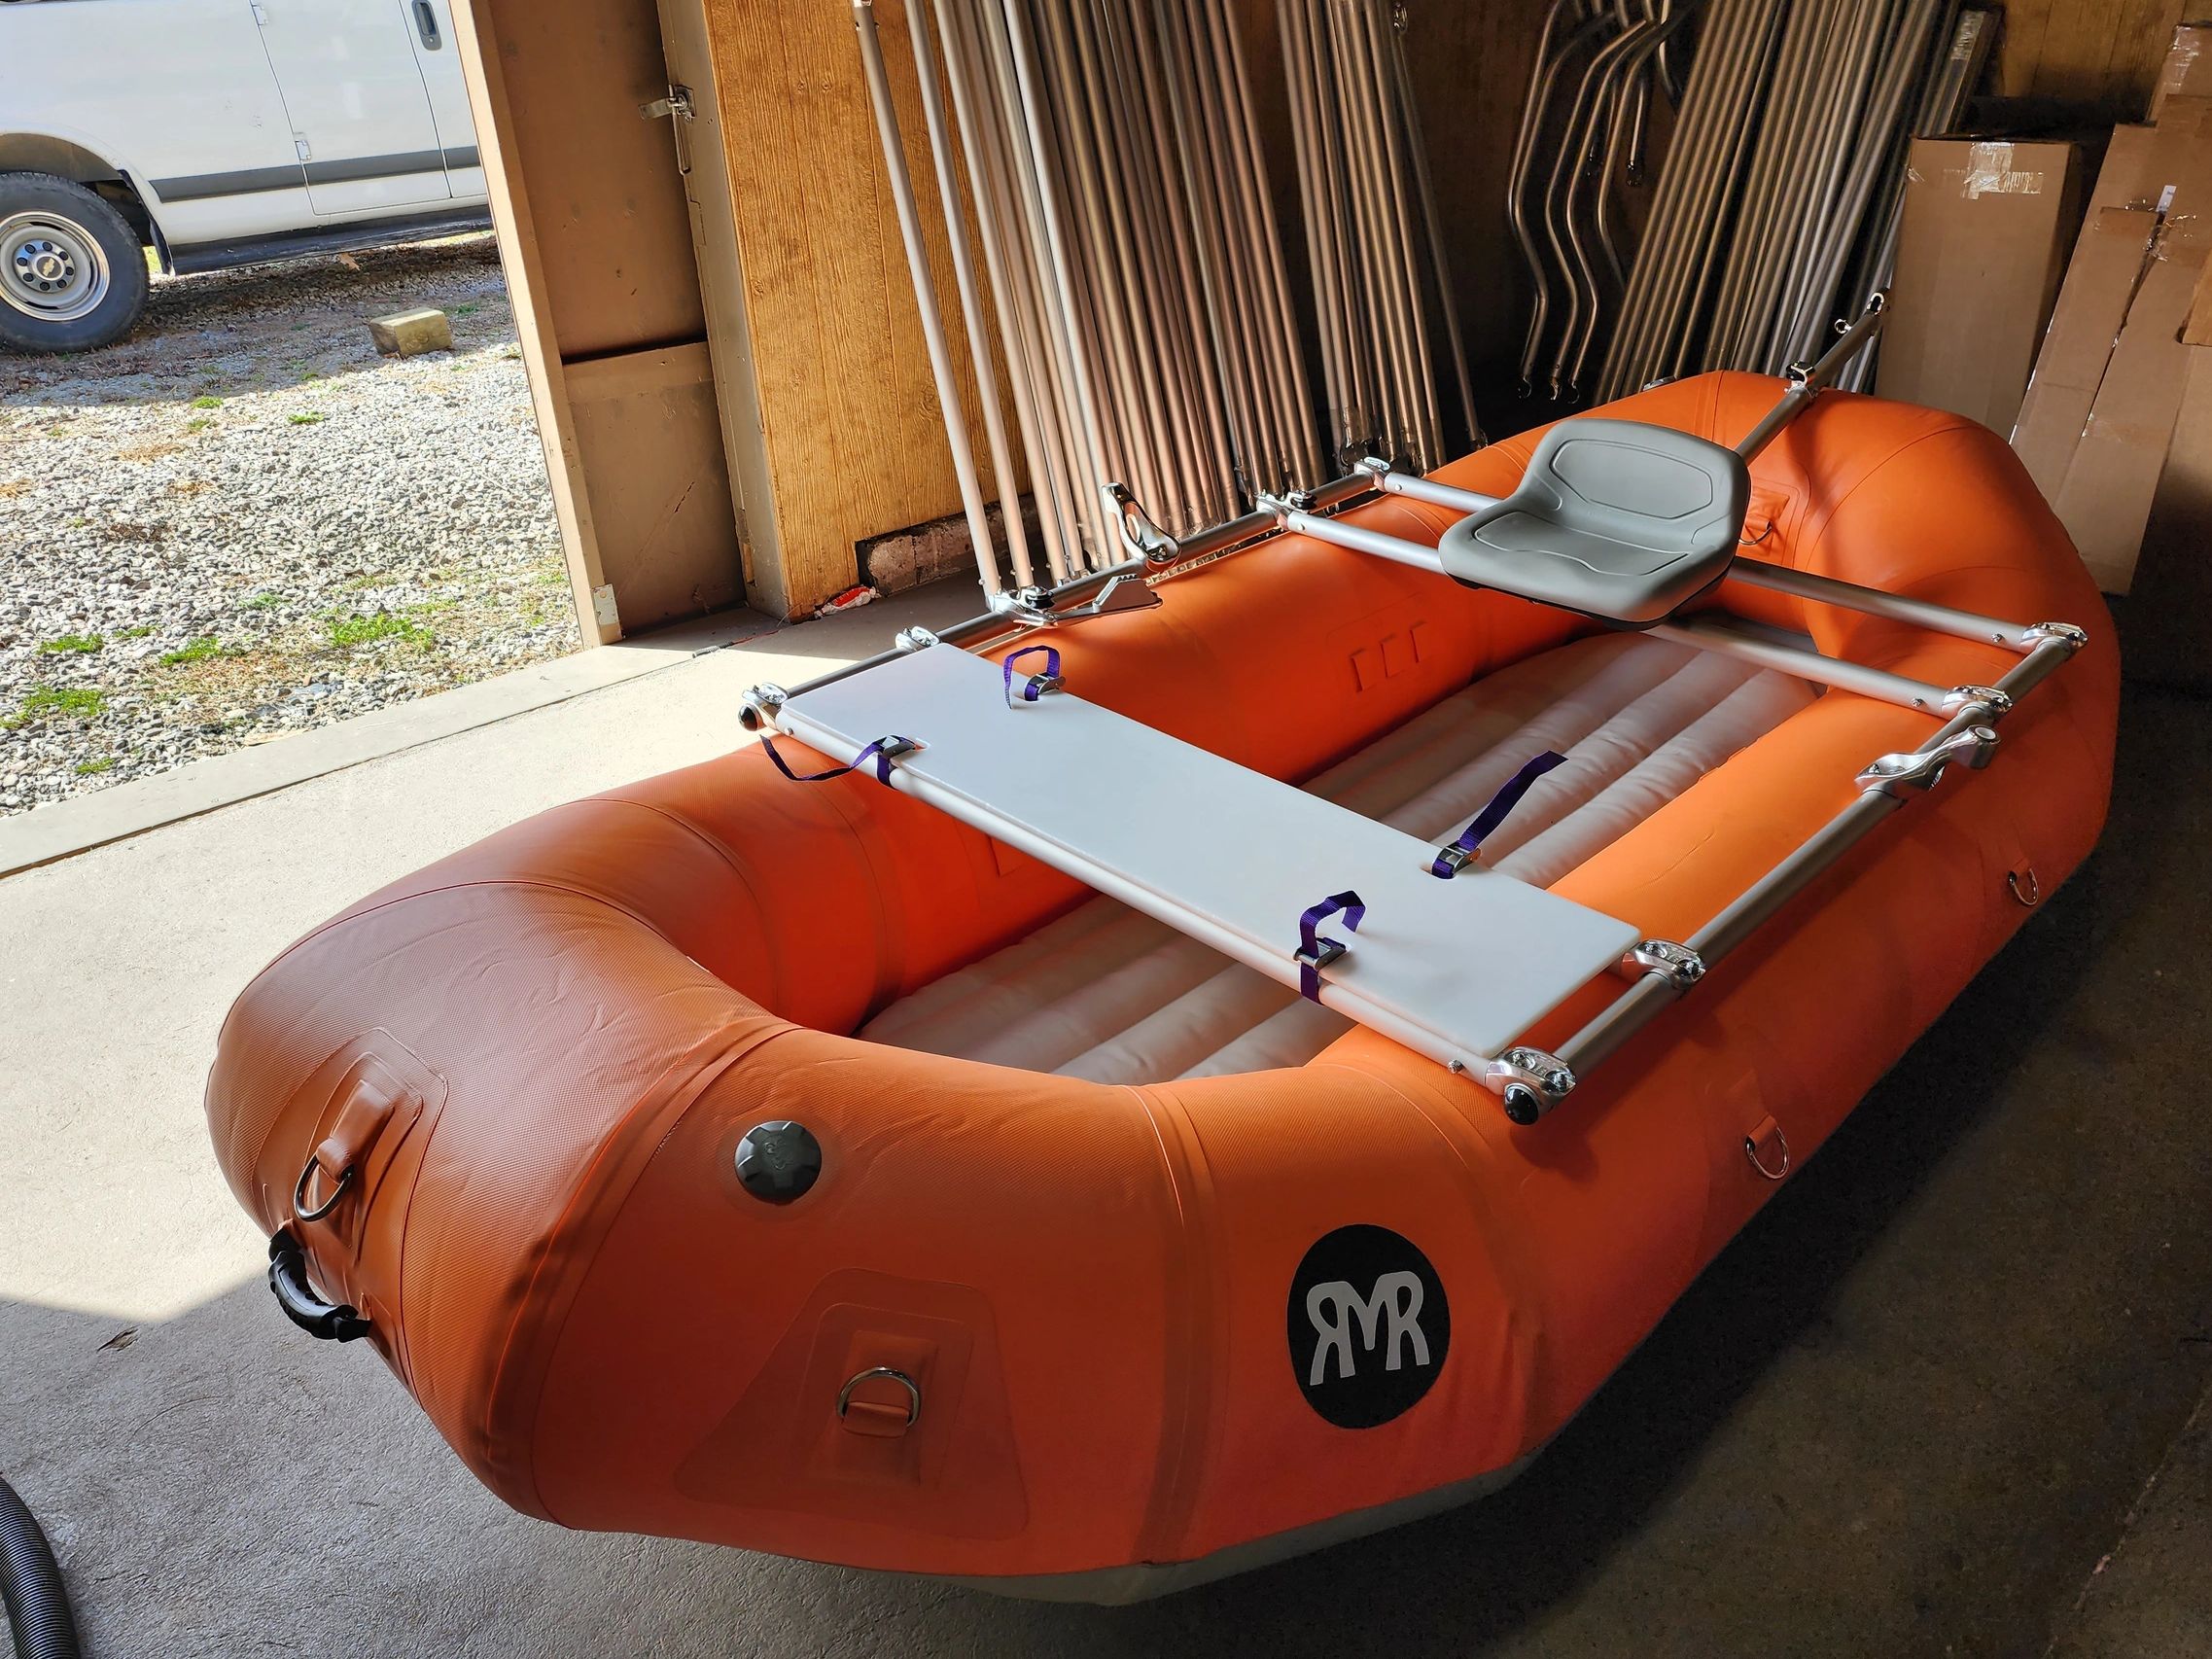 Raft Frames - Pro River Outfitters